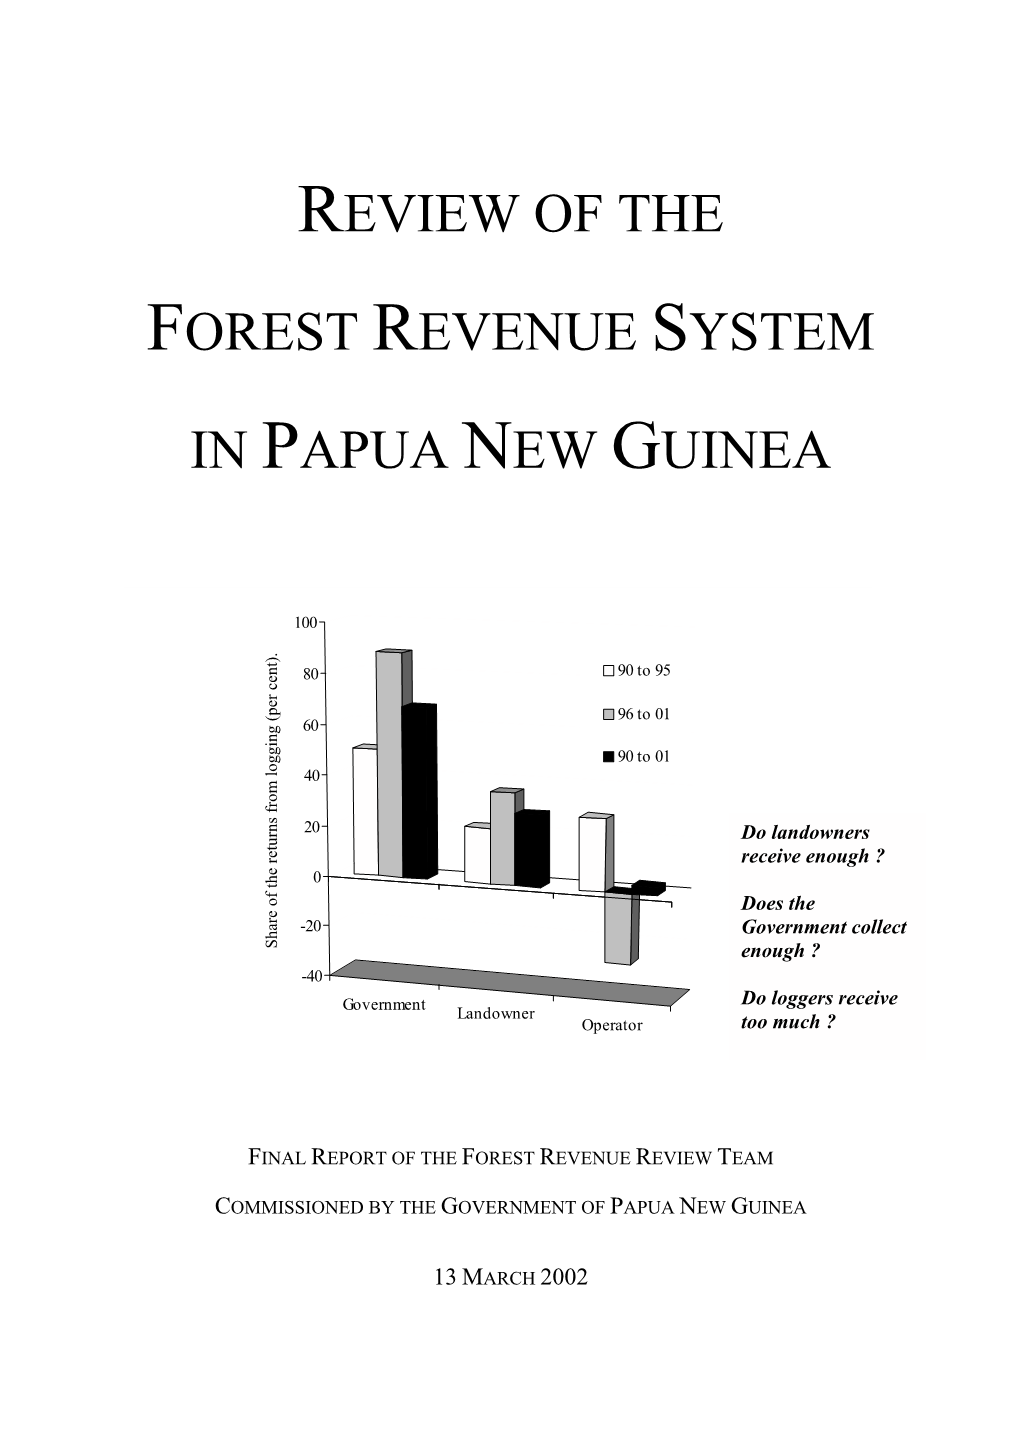 Review of the Forest Revenue System in Papua New Guinea